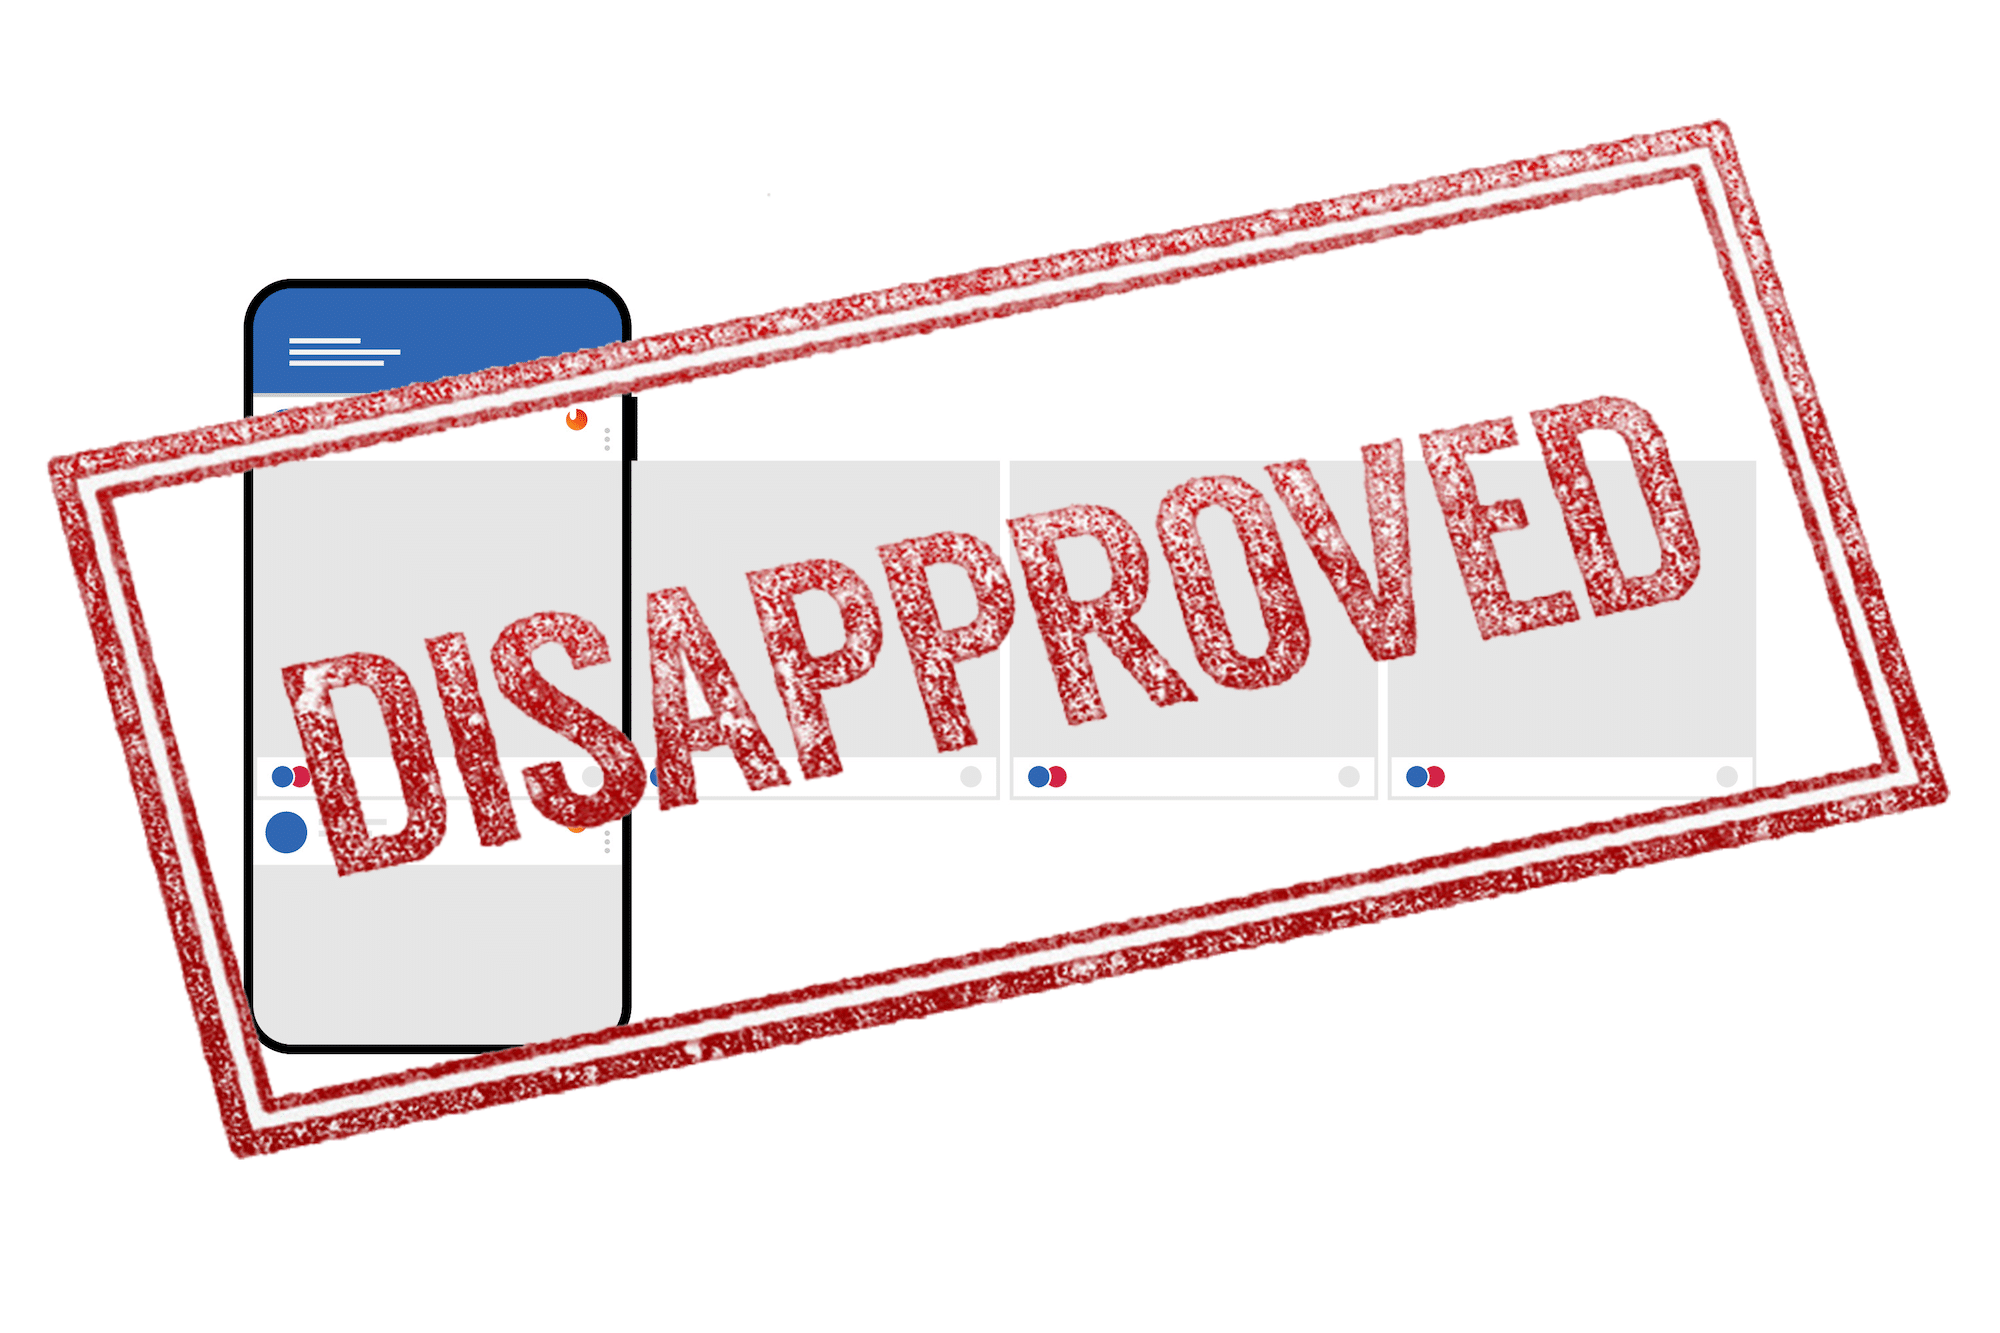 What to Do With Disapproved Facebook Ads